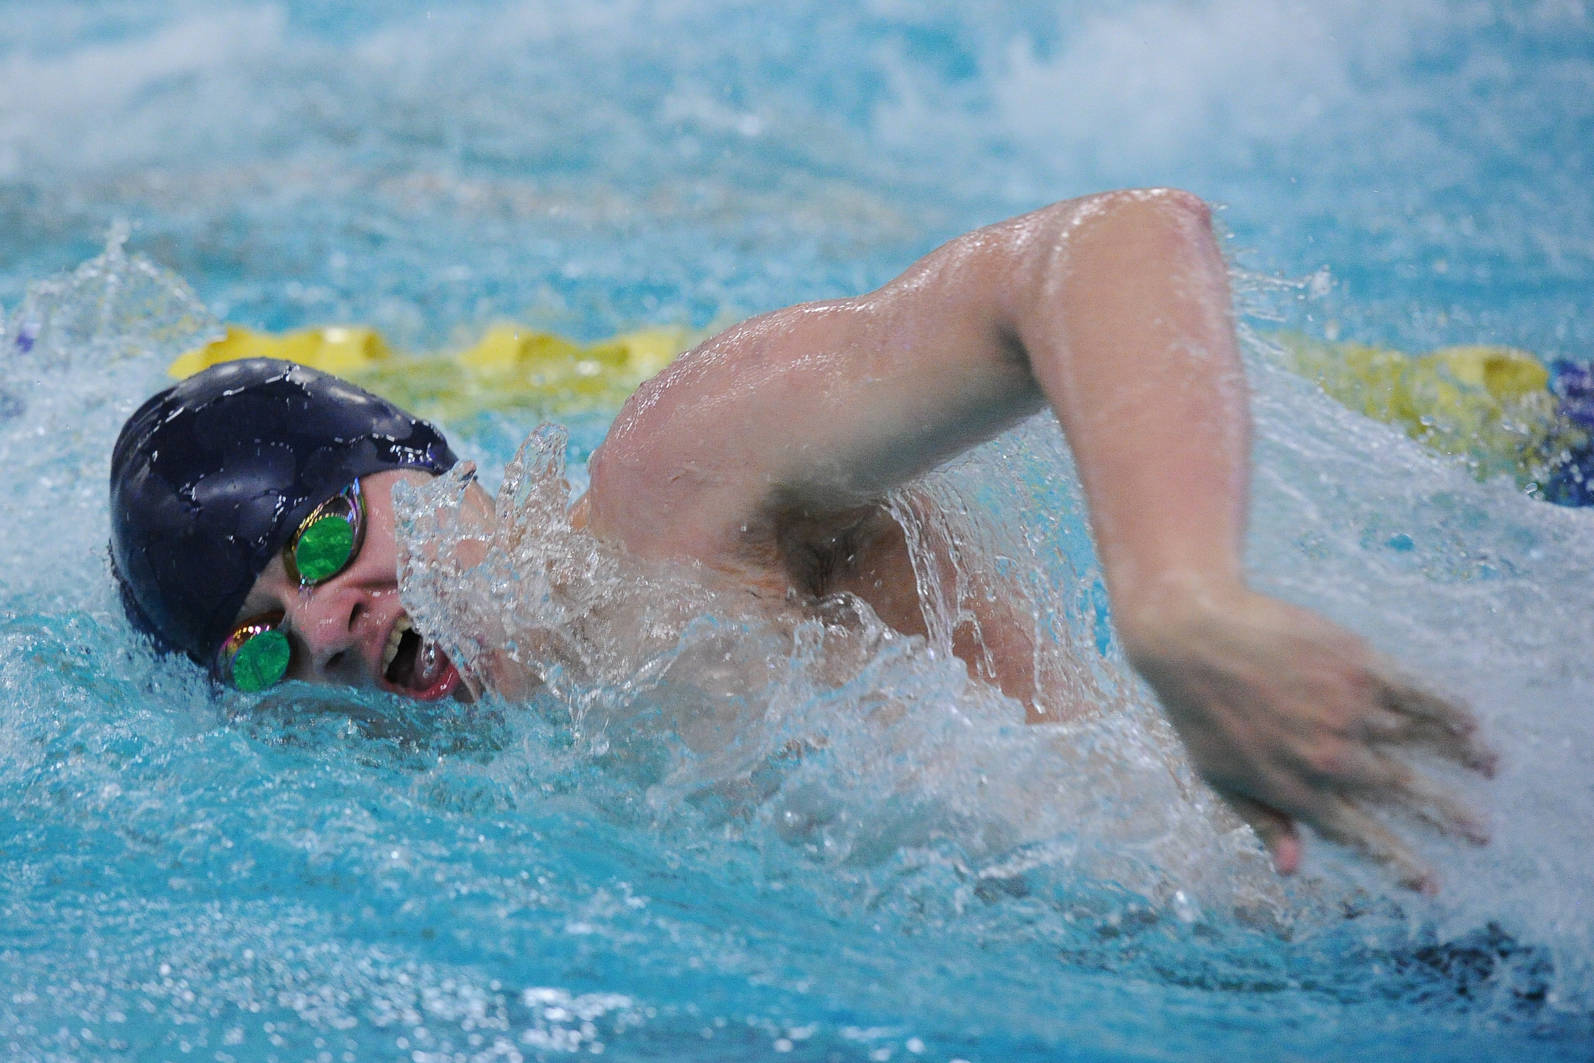 Thunder Mountain High School junior Micah Grigg swims in the 200-yard freestyle at the ASAA/First National Bank Alaska State Swim and Dive Championships on Saturday, Nov. 3, 2018. He finished in fifth place with a time of 1:50:13. (Michael Dinneen | For the Juneau Empire)